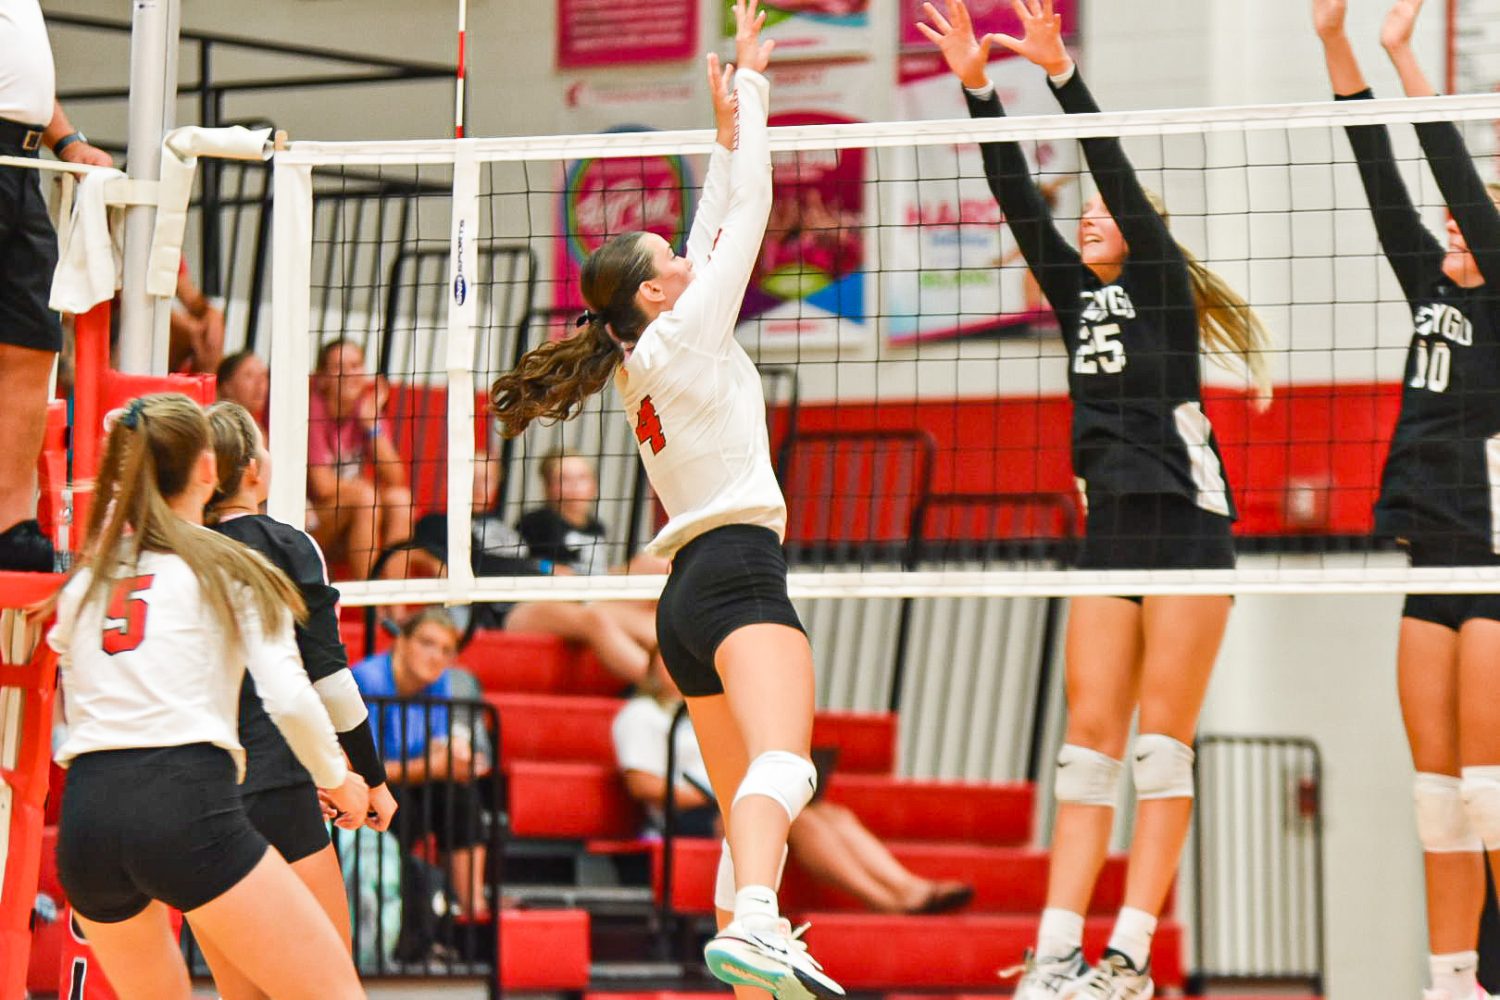 Kent City captures volleyball victory over league foe Newaygo